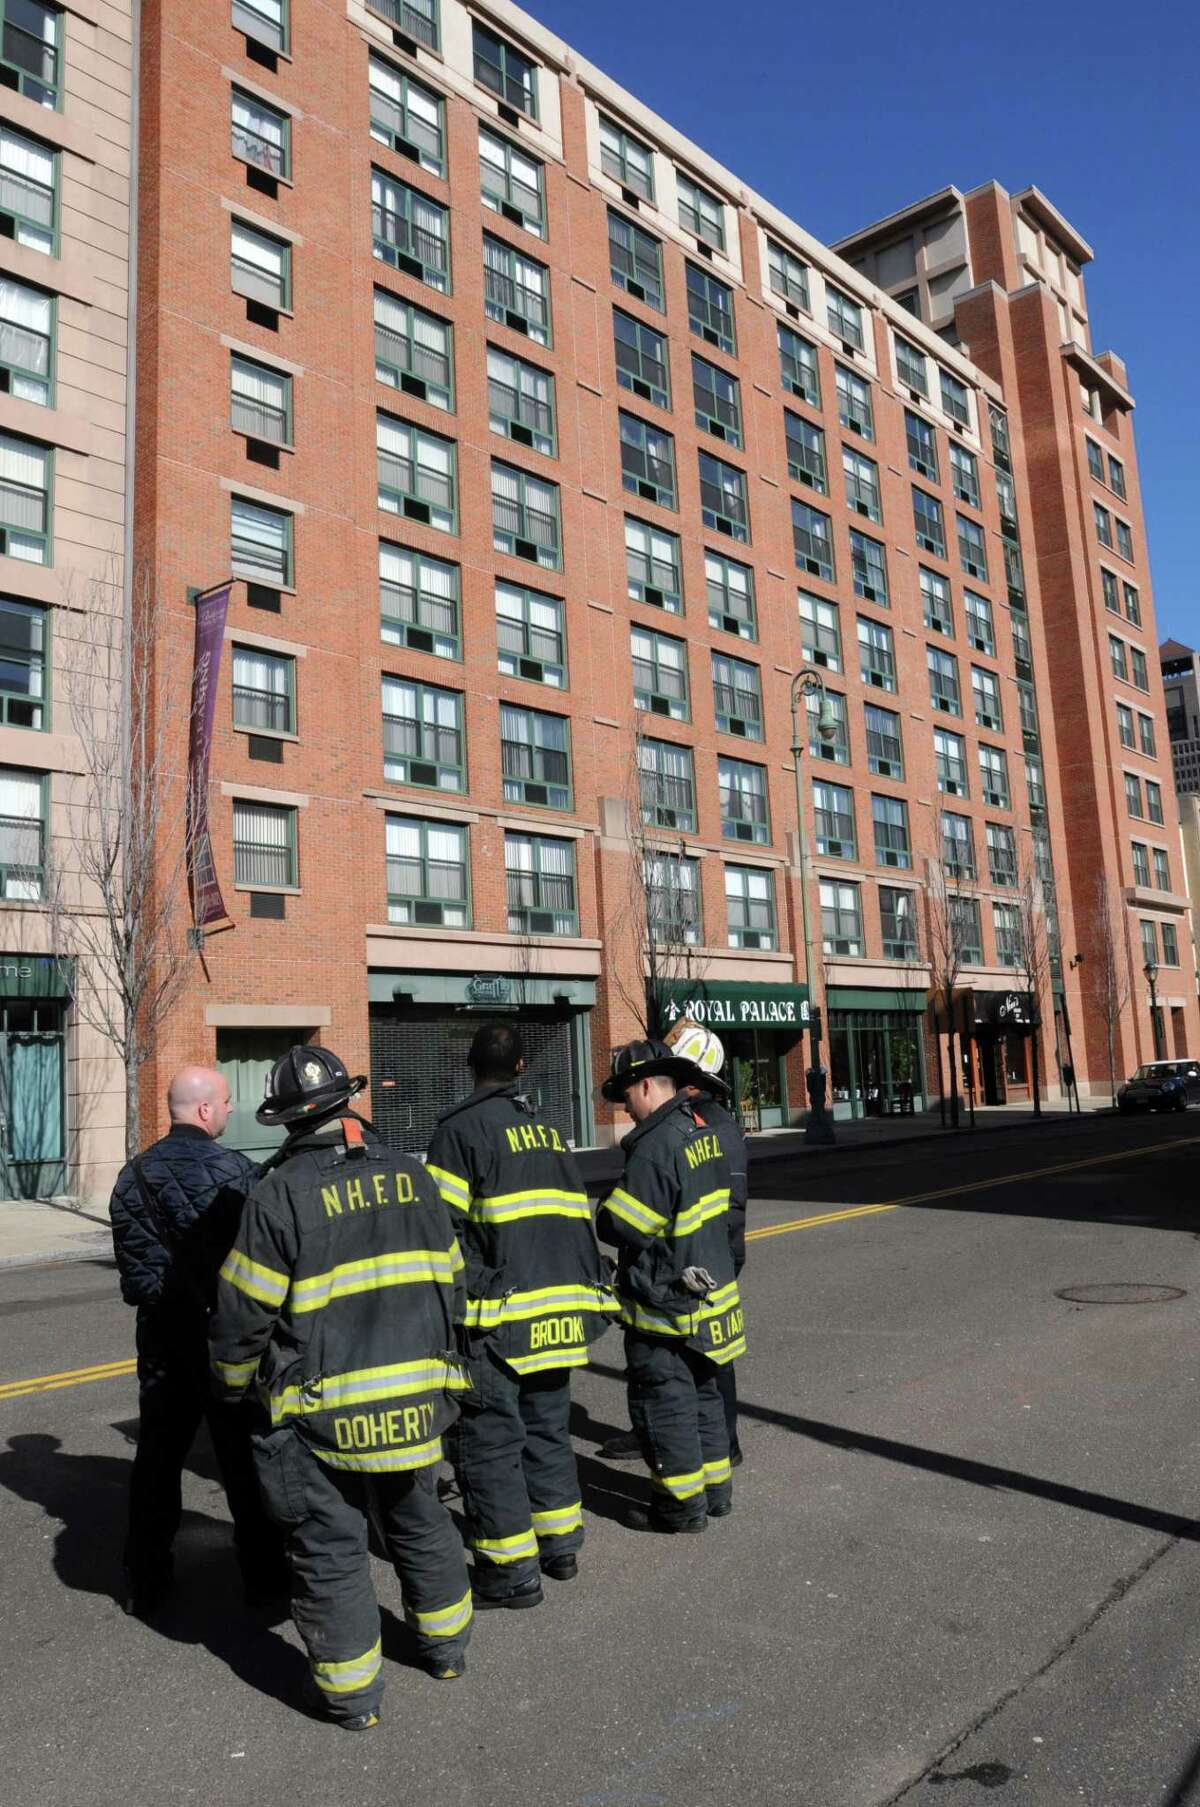 The smell of gas caused evacuation of the first block of Orange St., including the apartment building at #44. Residents were allowed back in around 11am. Mara Lavitt/New Haven Register 3/13/13